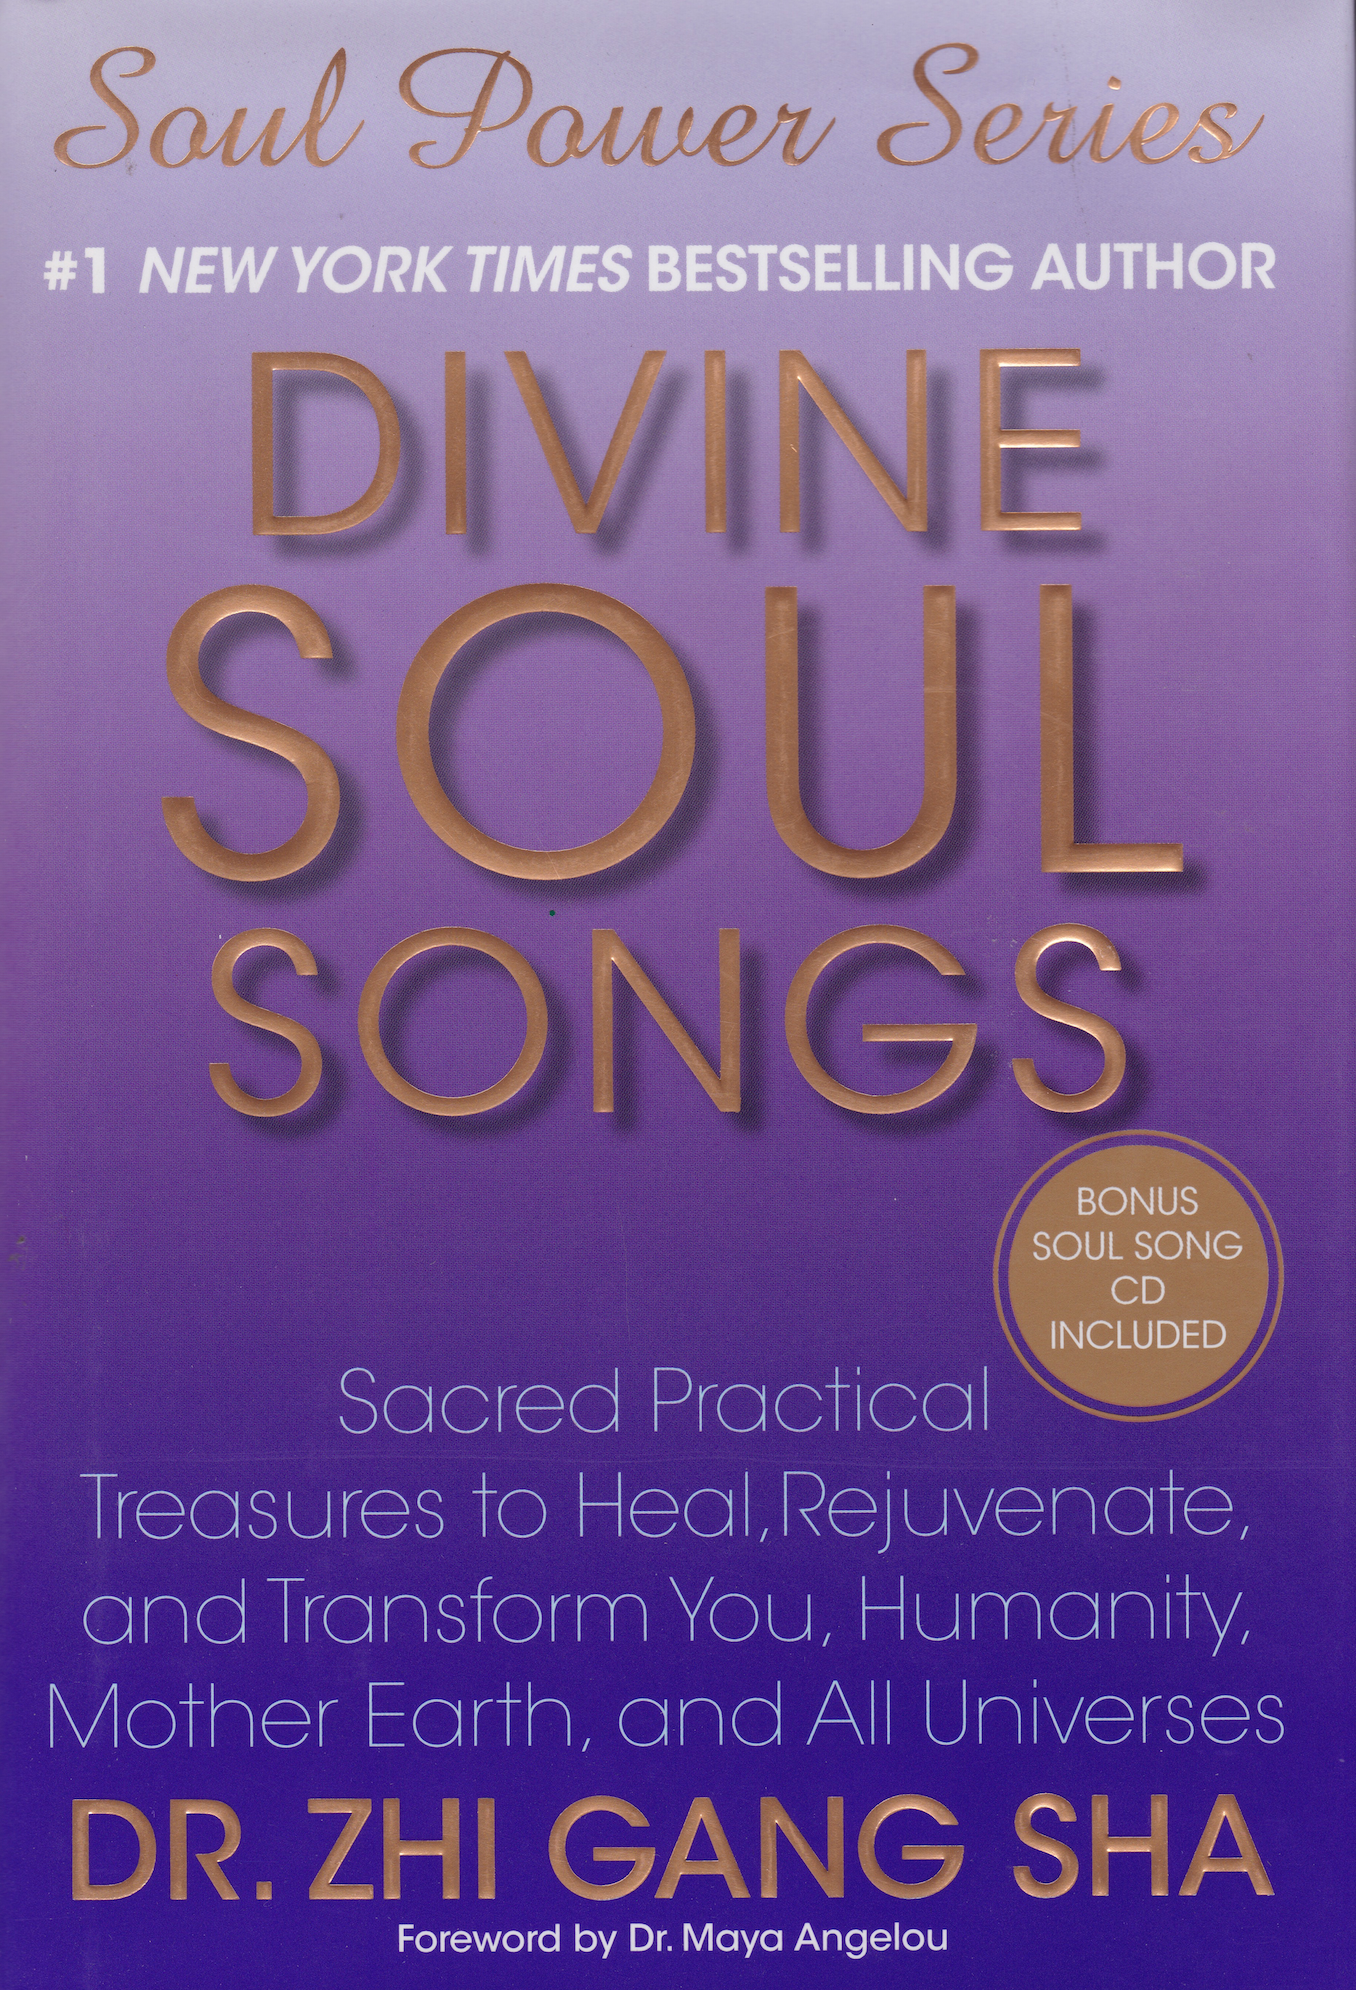 Divine Soul Songs: Sacred Practical Treasures to Heal, Rejuvenate, and Transform You, Humanity, Mother Earth, and All Universes Book & CD by Zhi Gang Sha (Preowned)